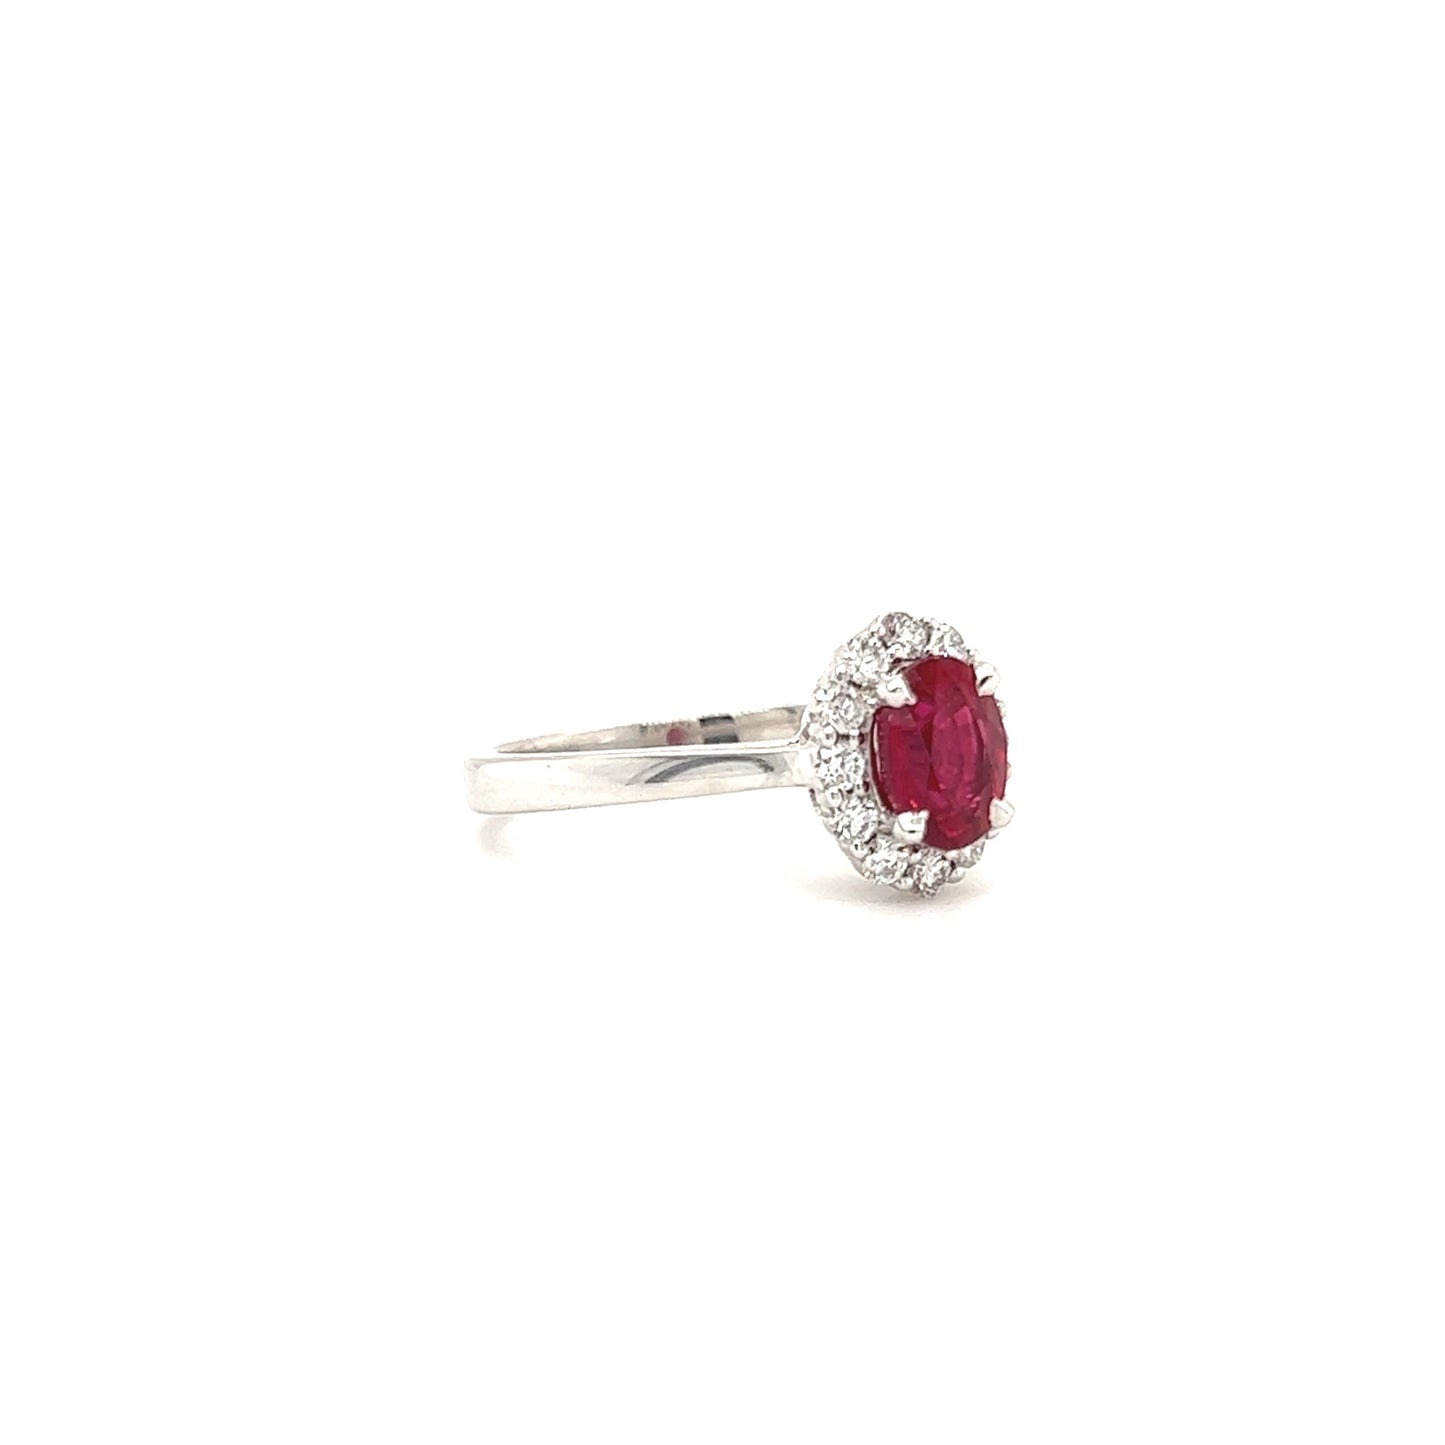 Oval Ruby Ring with Diamond Halo in 14K White Gold Right Side View